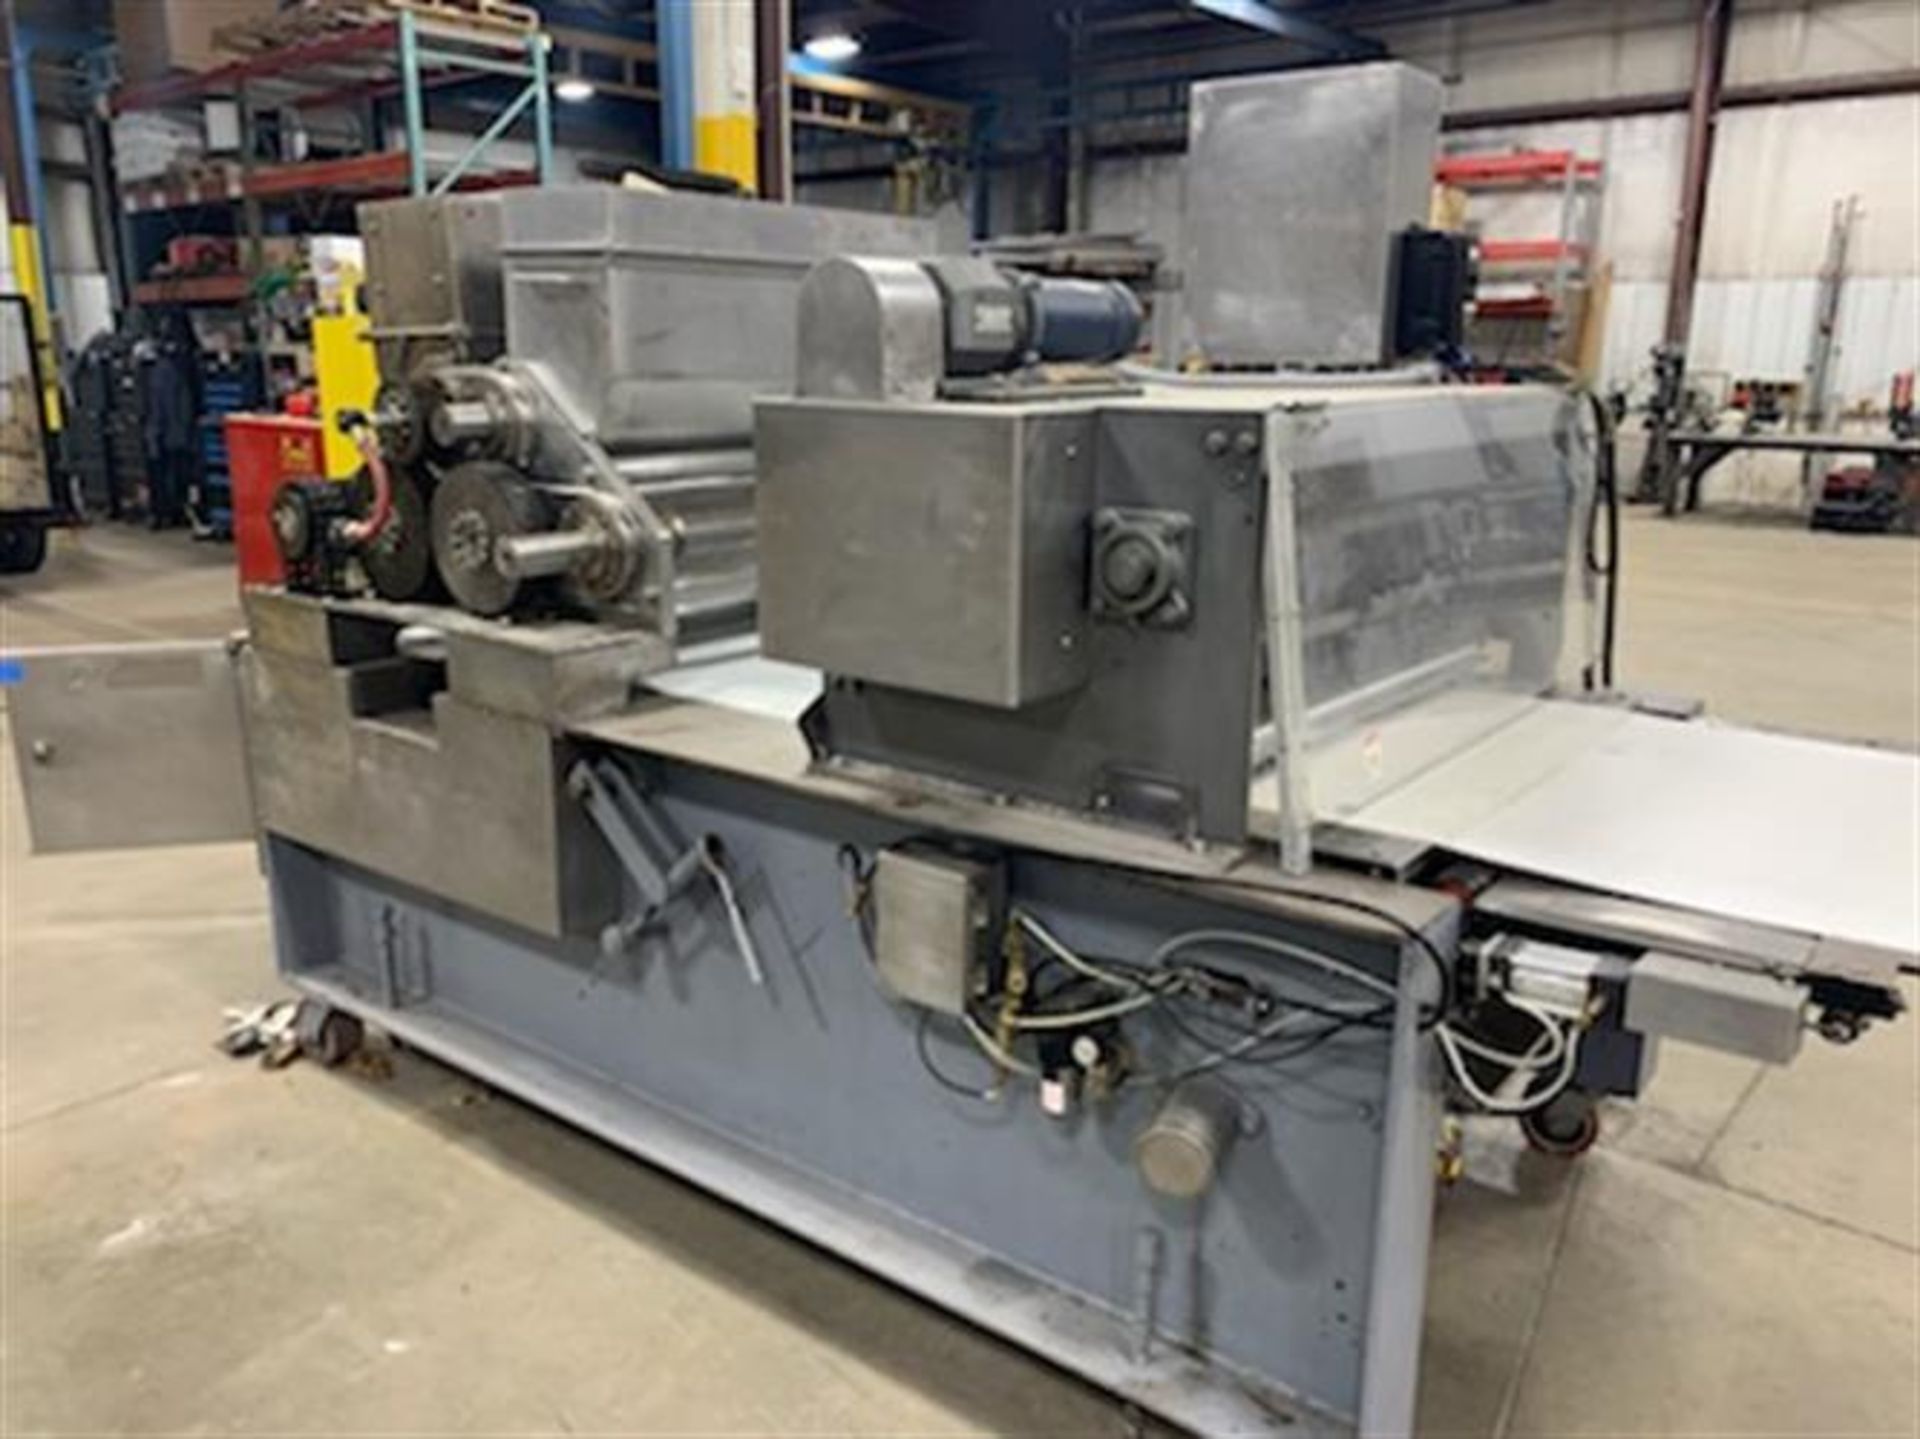 American Machine and Design 34" Co-Extruder with Guillotine Cutter - 34" wide Co-Extrusion head -